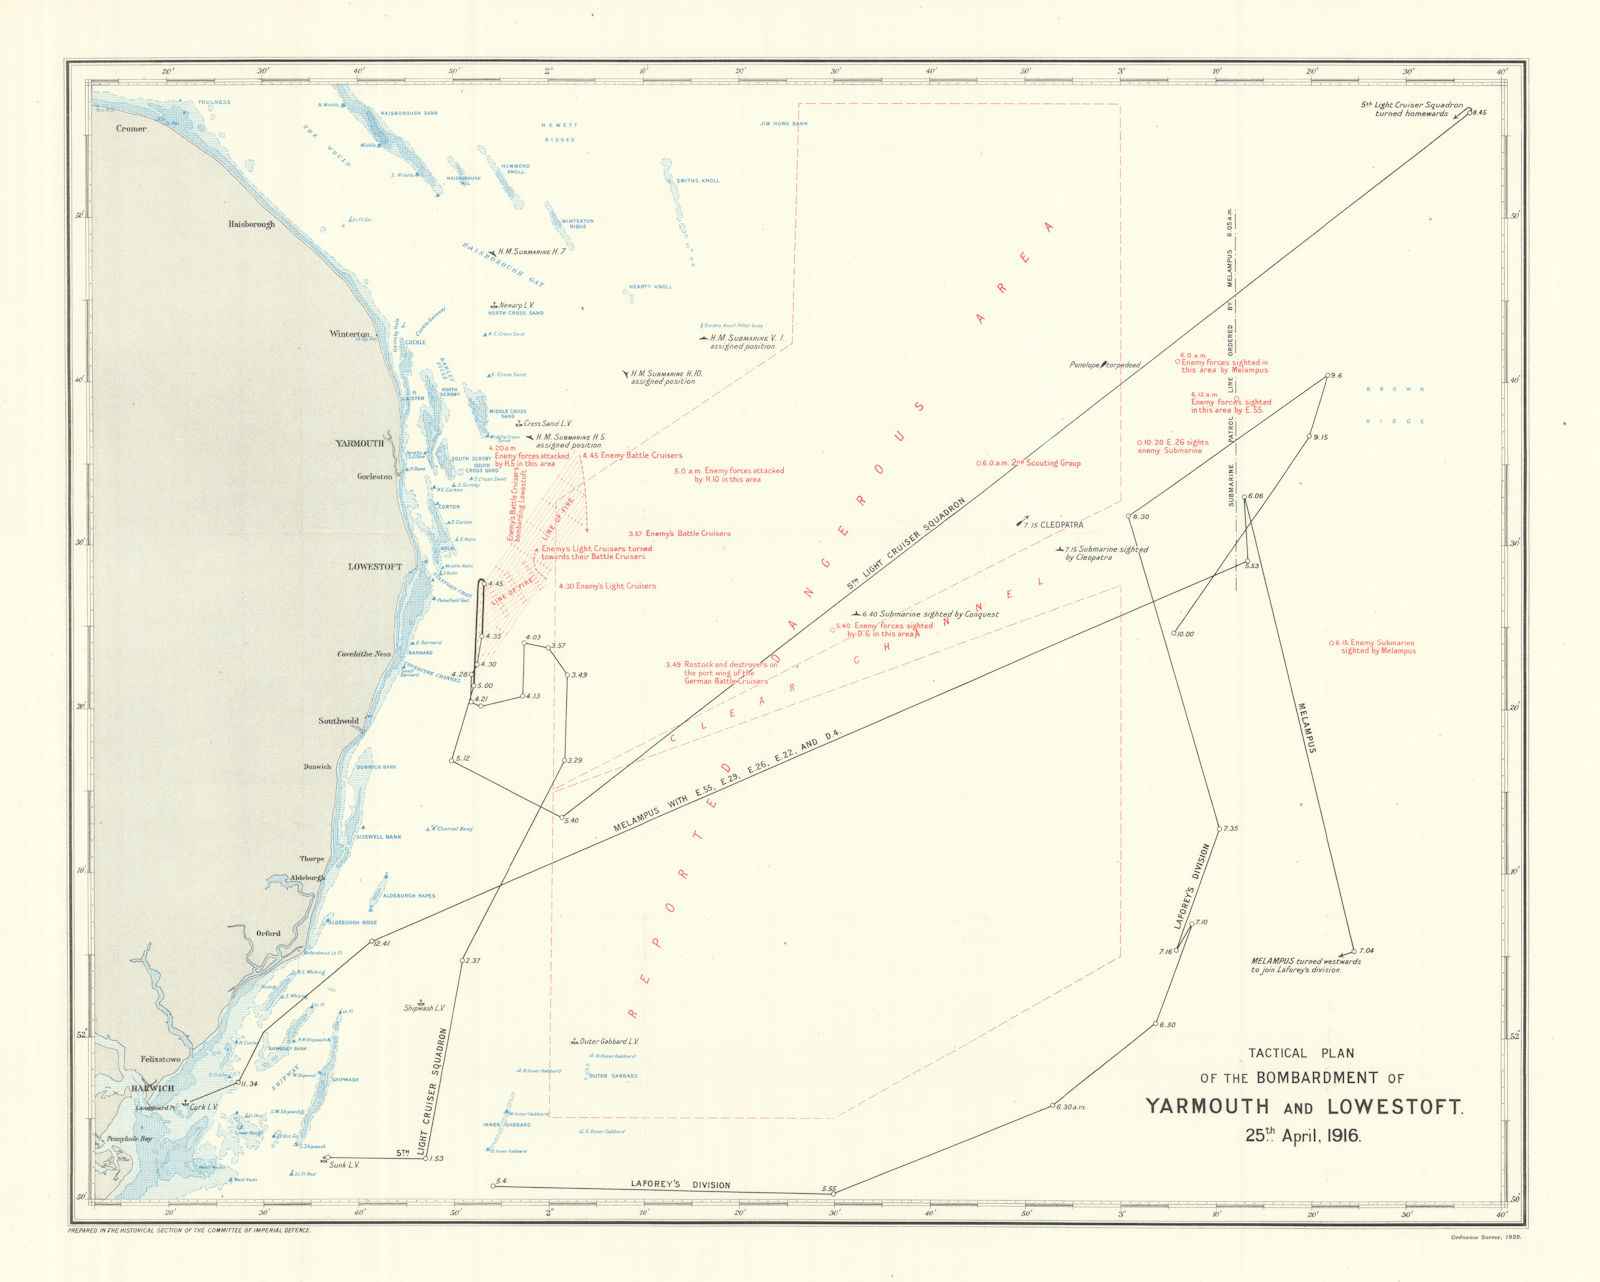 Associate Product Bombardment of Yarmouth & Lowestoft. 25th April, 1916. Tactical plan 1923 map